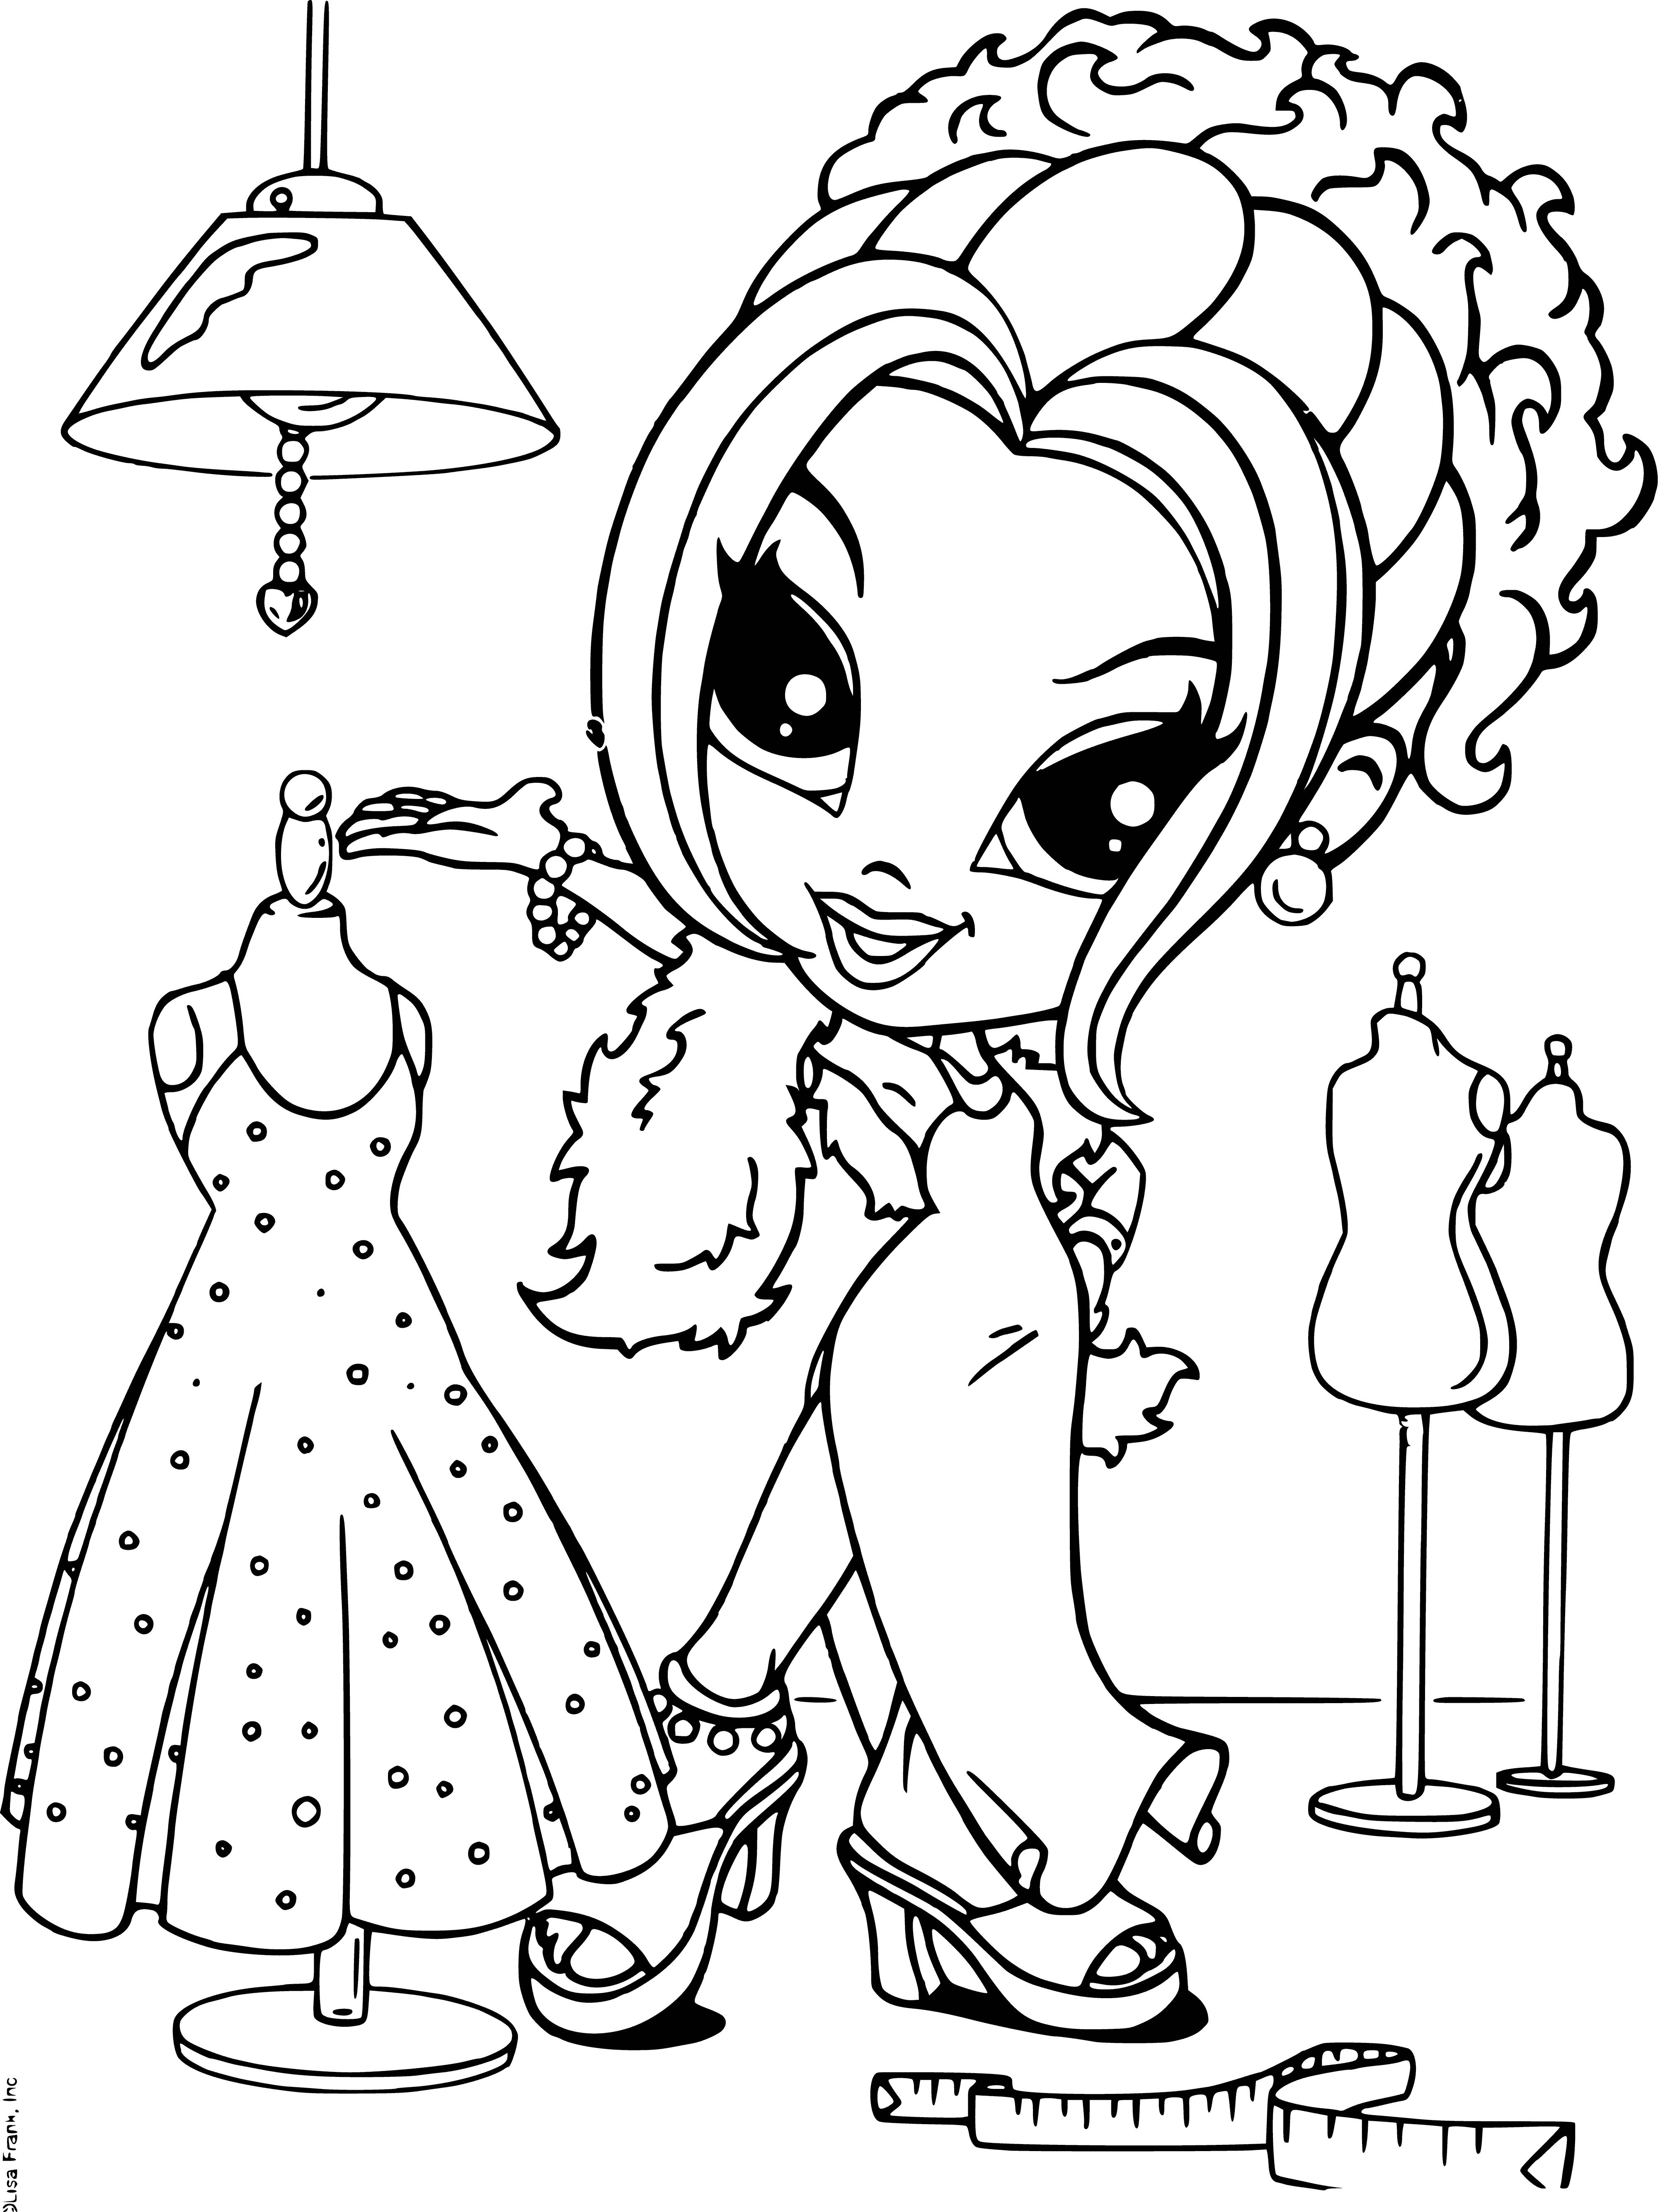 coloring page: Glamorous girl with long blonde hair in a pink dress ready for a night out! #LisaFrank #GlamourGirl